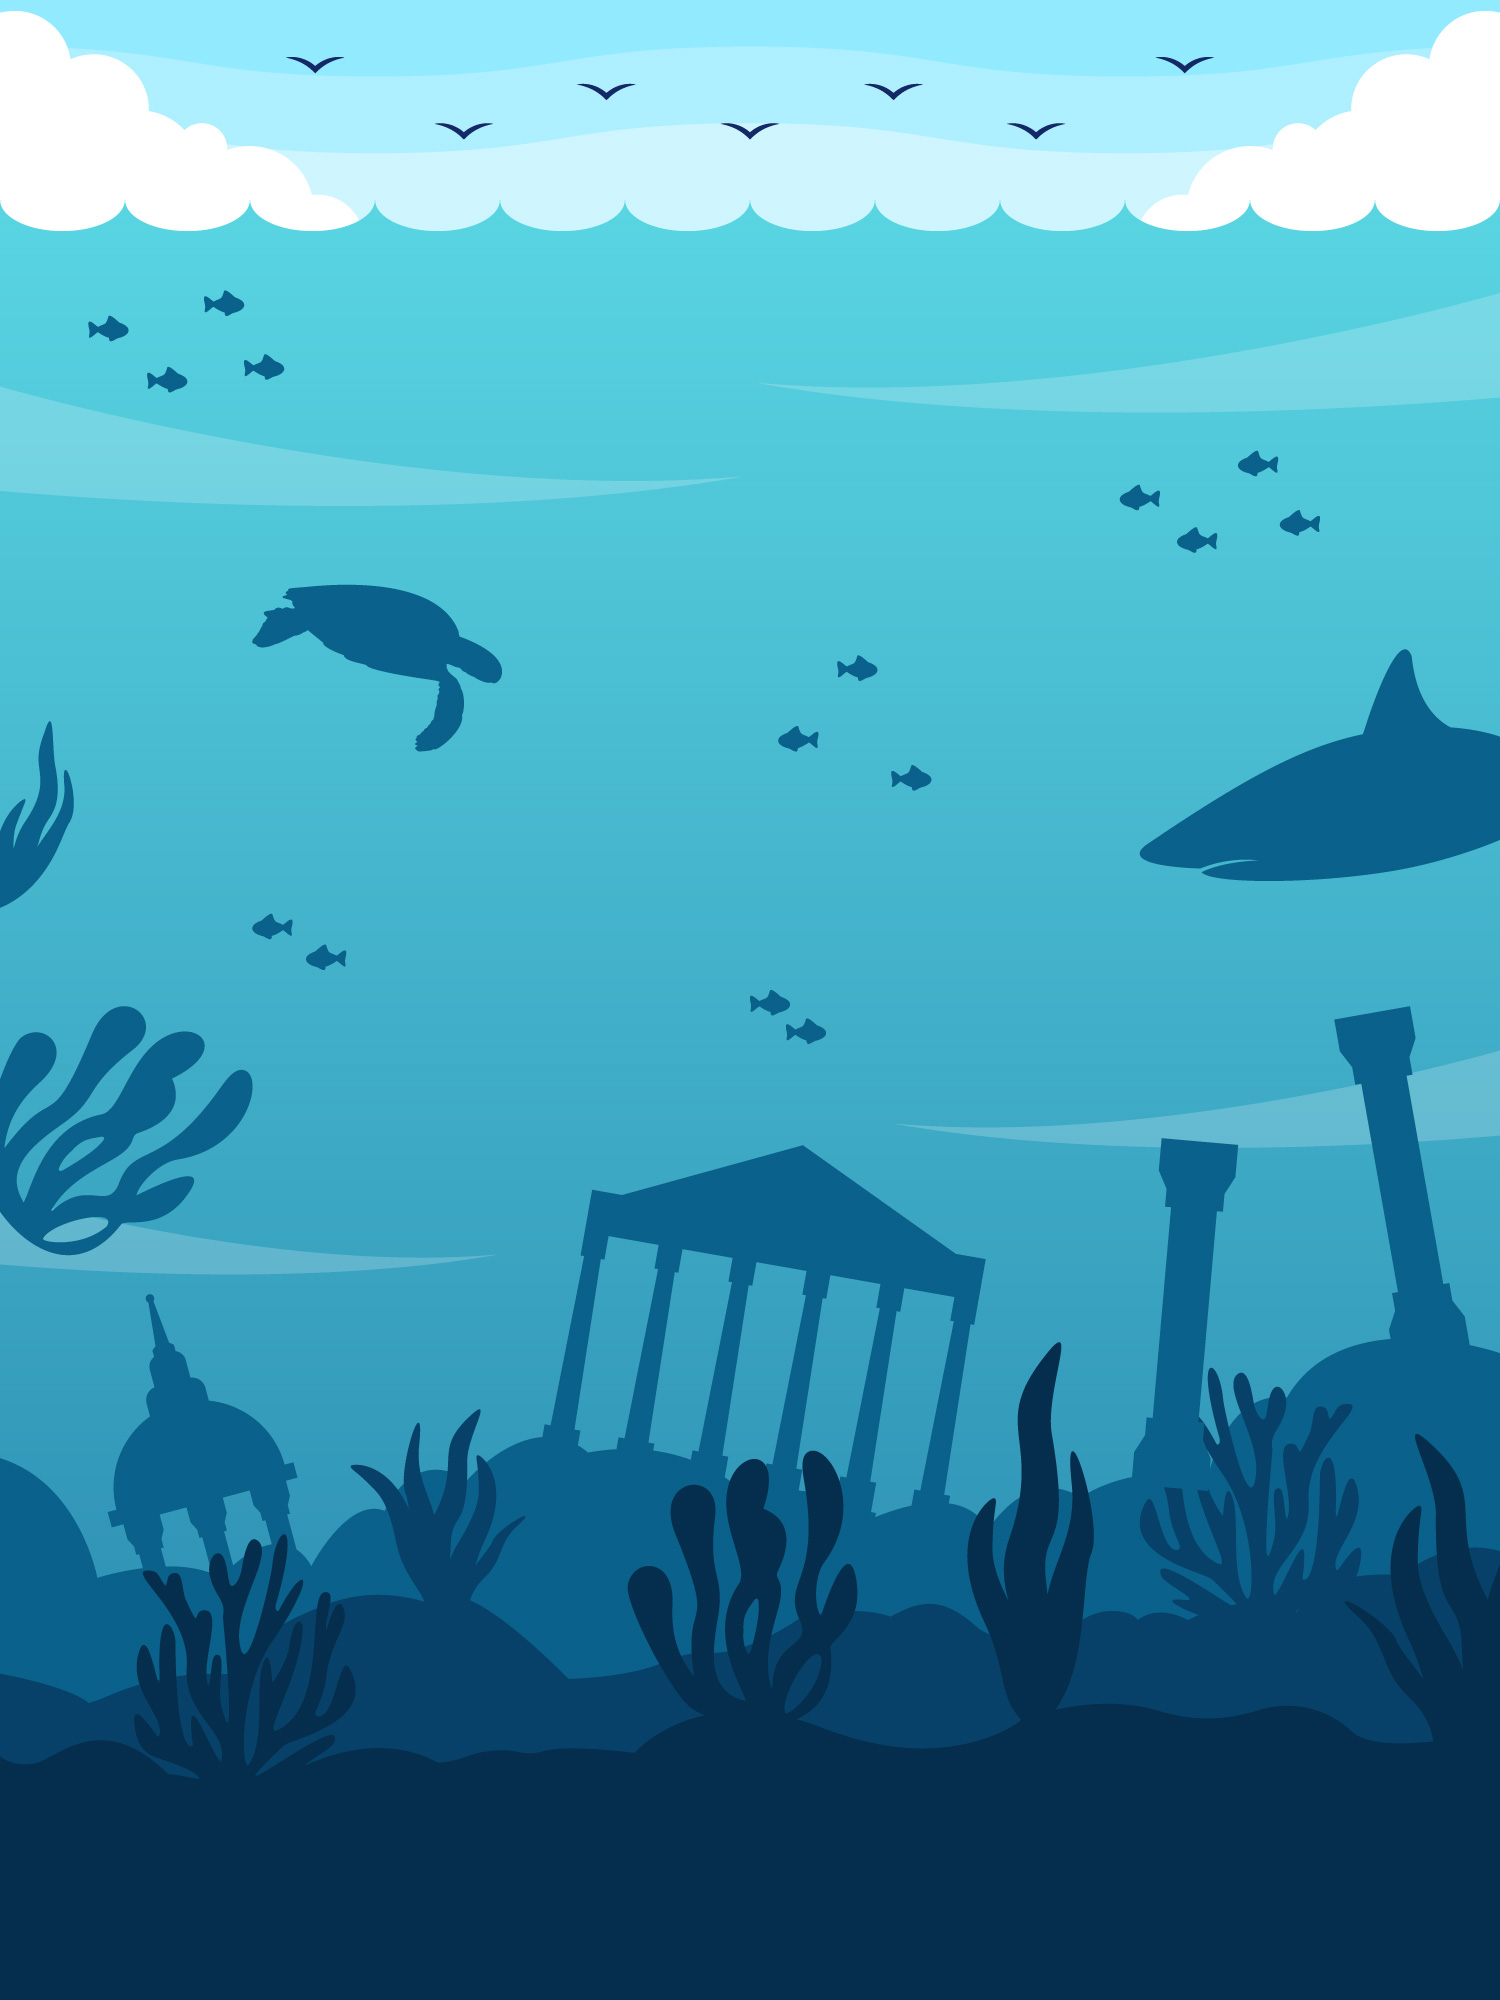 Download Awesome Ocean Background Vector - Download Free Vectors ...